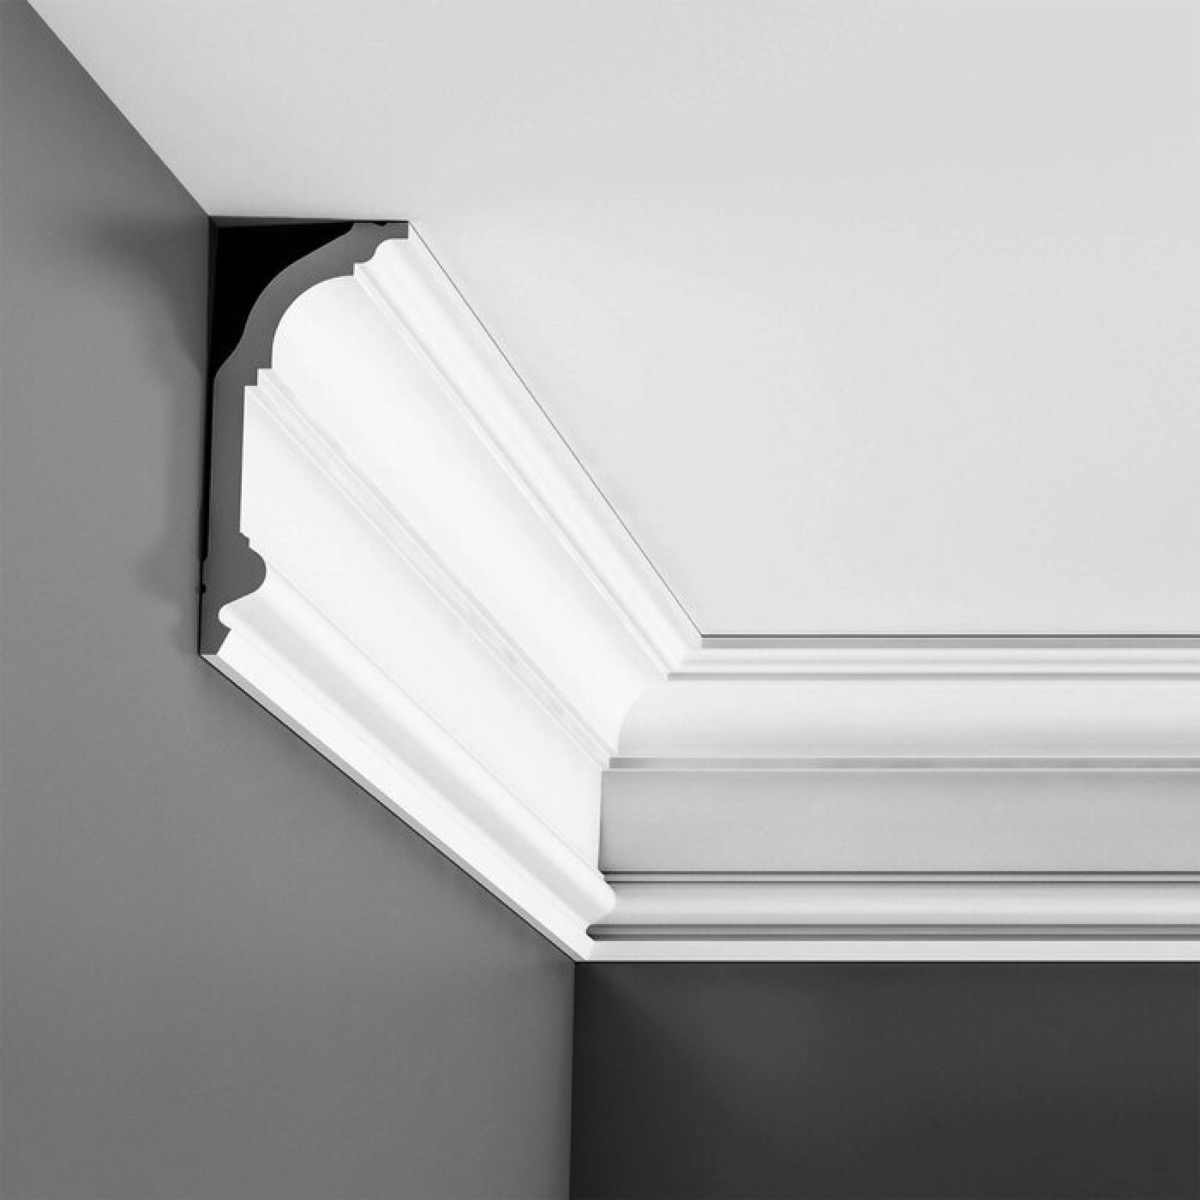 Crown molding